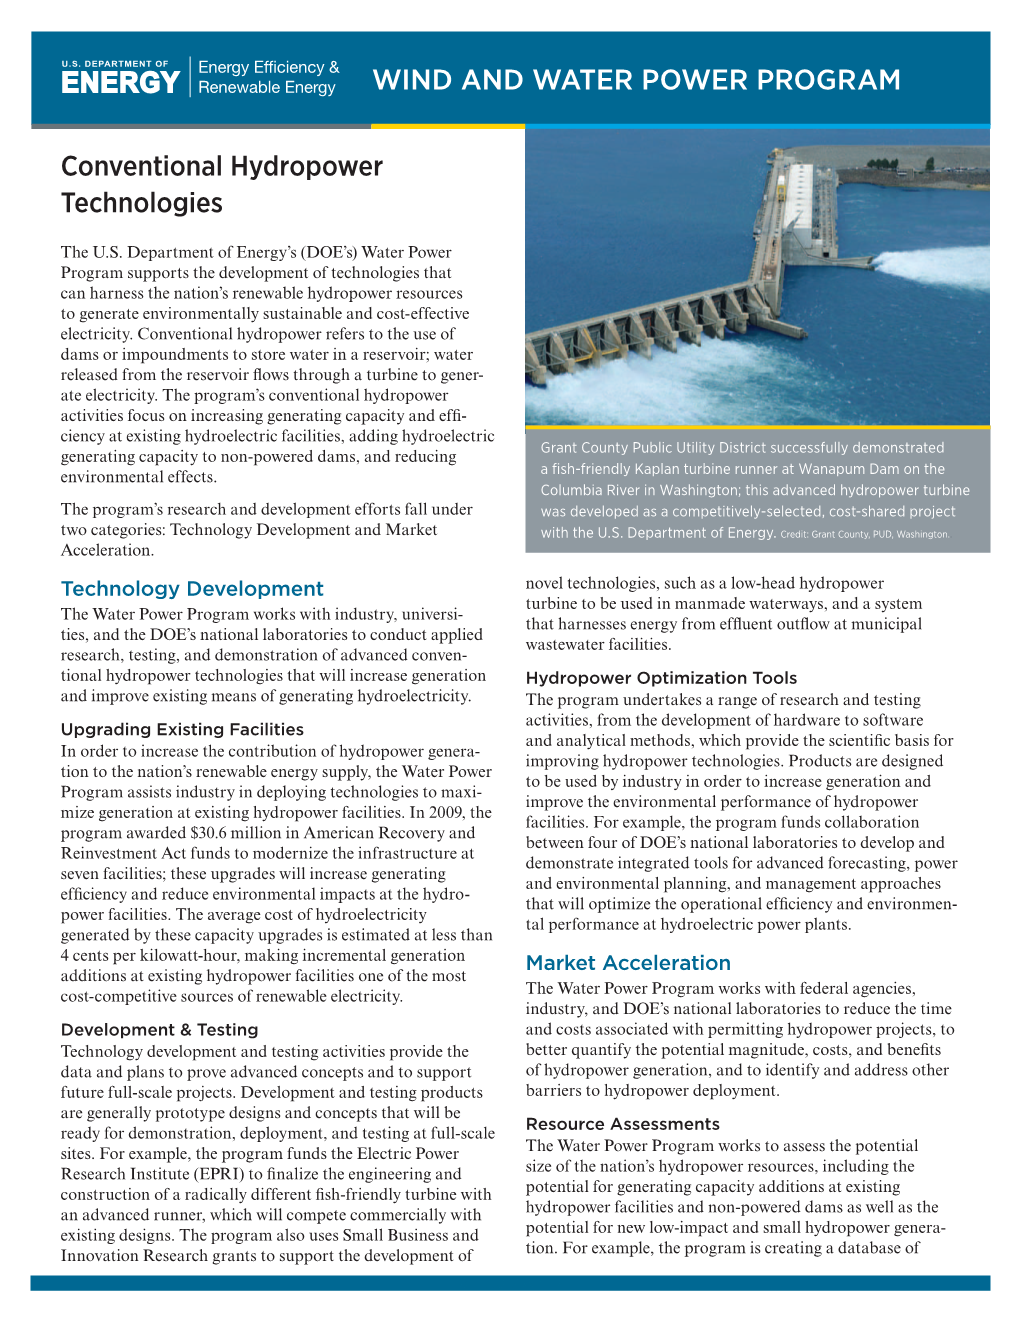 Conventional Hydropower Technologies